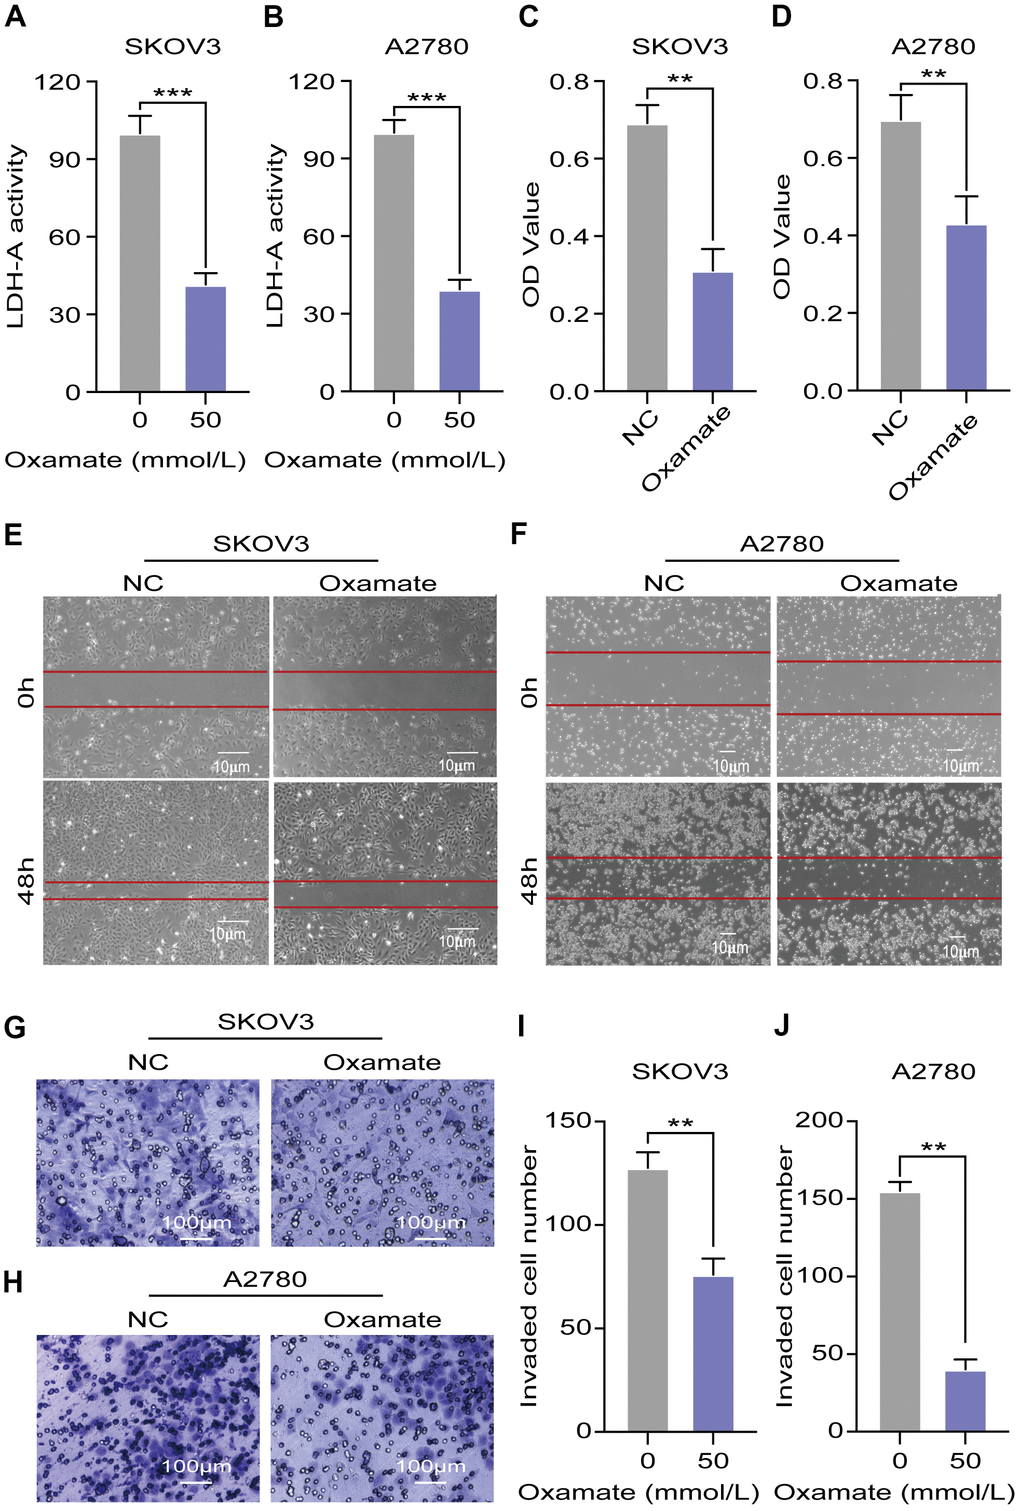 Oxamate suppressed the proliferation, migration, and invasion ability of both A2780 and SKOV3 cells. (A, B) Expression of LDH-A in A2780 and SKOV3 cells after oxamate treated for 24 hours. (C, D) Proliferation rates of A2780 and SKOV3 cells were evaluated by CCK-8 assays. (E, F) Scratch assays were used to test migration ability of A2780 and SKOV3 cells after oxamate treated for 48 hours. (G, H) Images of metastatic tumor cells were recorded by microscope. (I, J) Number of invaded cells were counted under the microscope. Mean ± SEM, **P 